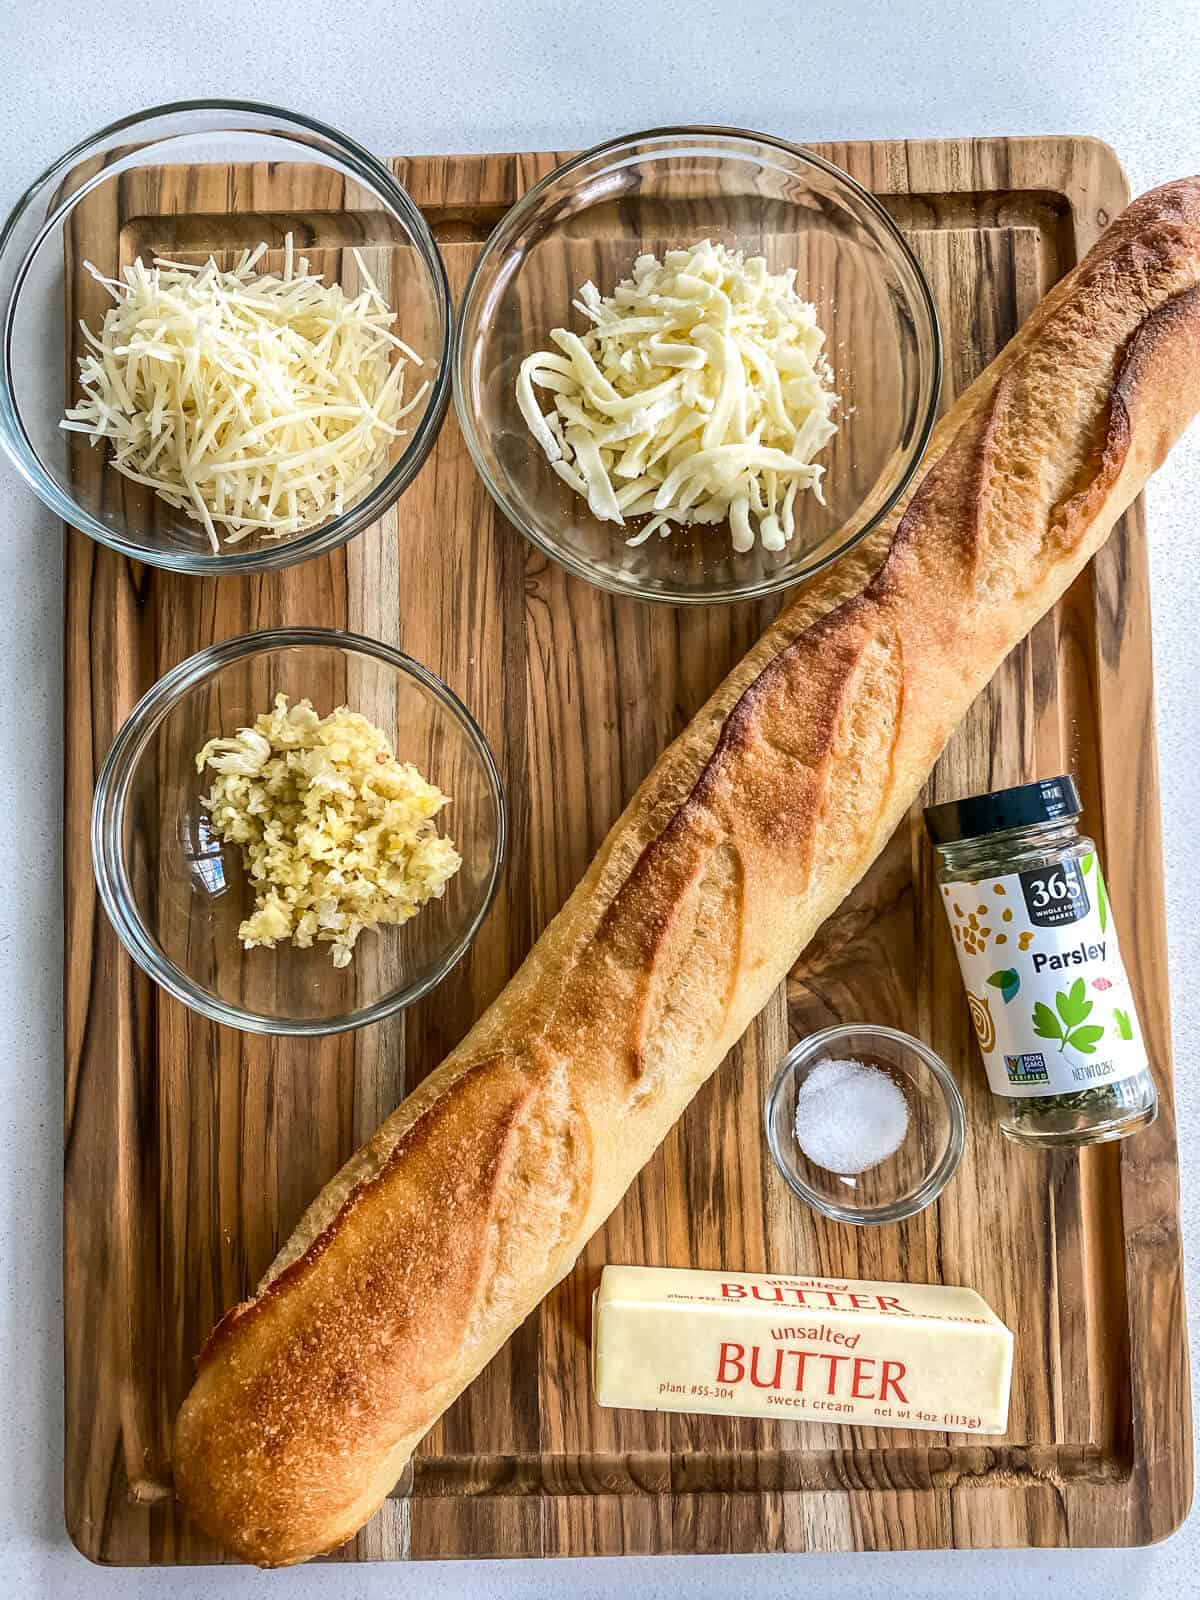 The ingredients needed to make air fryer garlic bread, including a baguette, cheese, and butter.